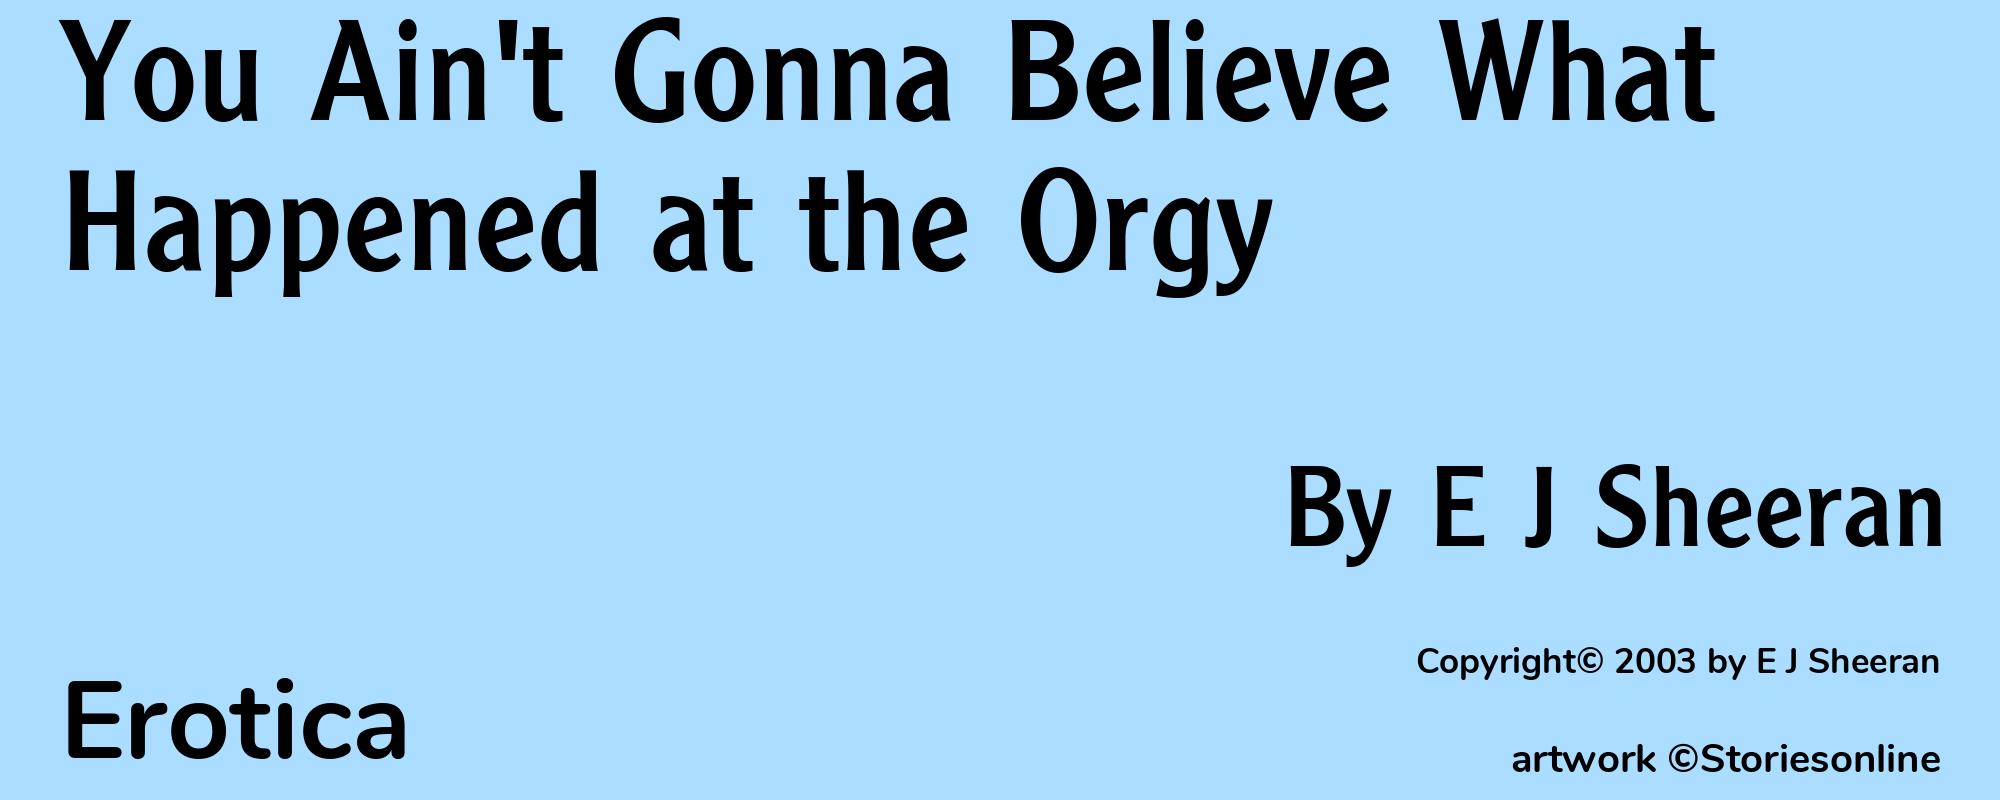 You Ain't Gonna Believe What Happened at the Orgy - Cover